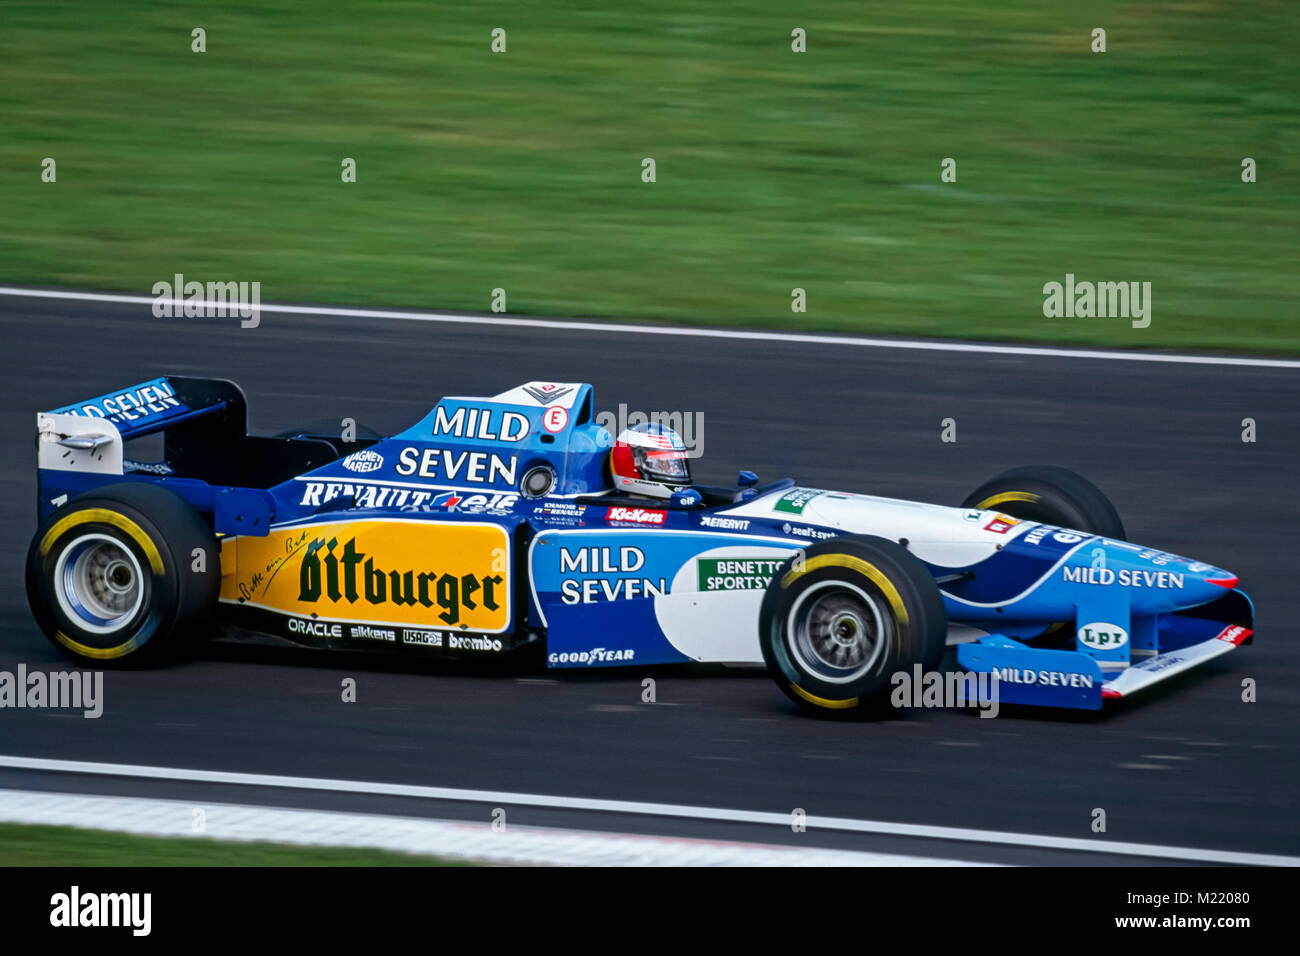 Benetton Renault High Resolution Stock Photography and Images - Alamy